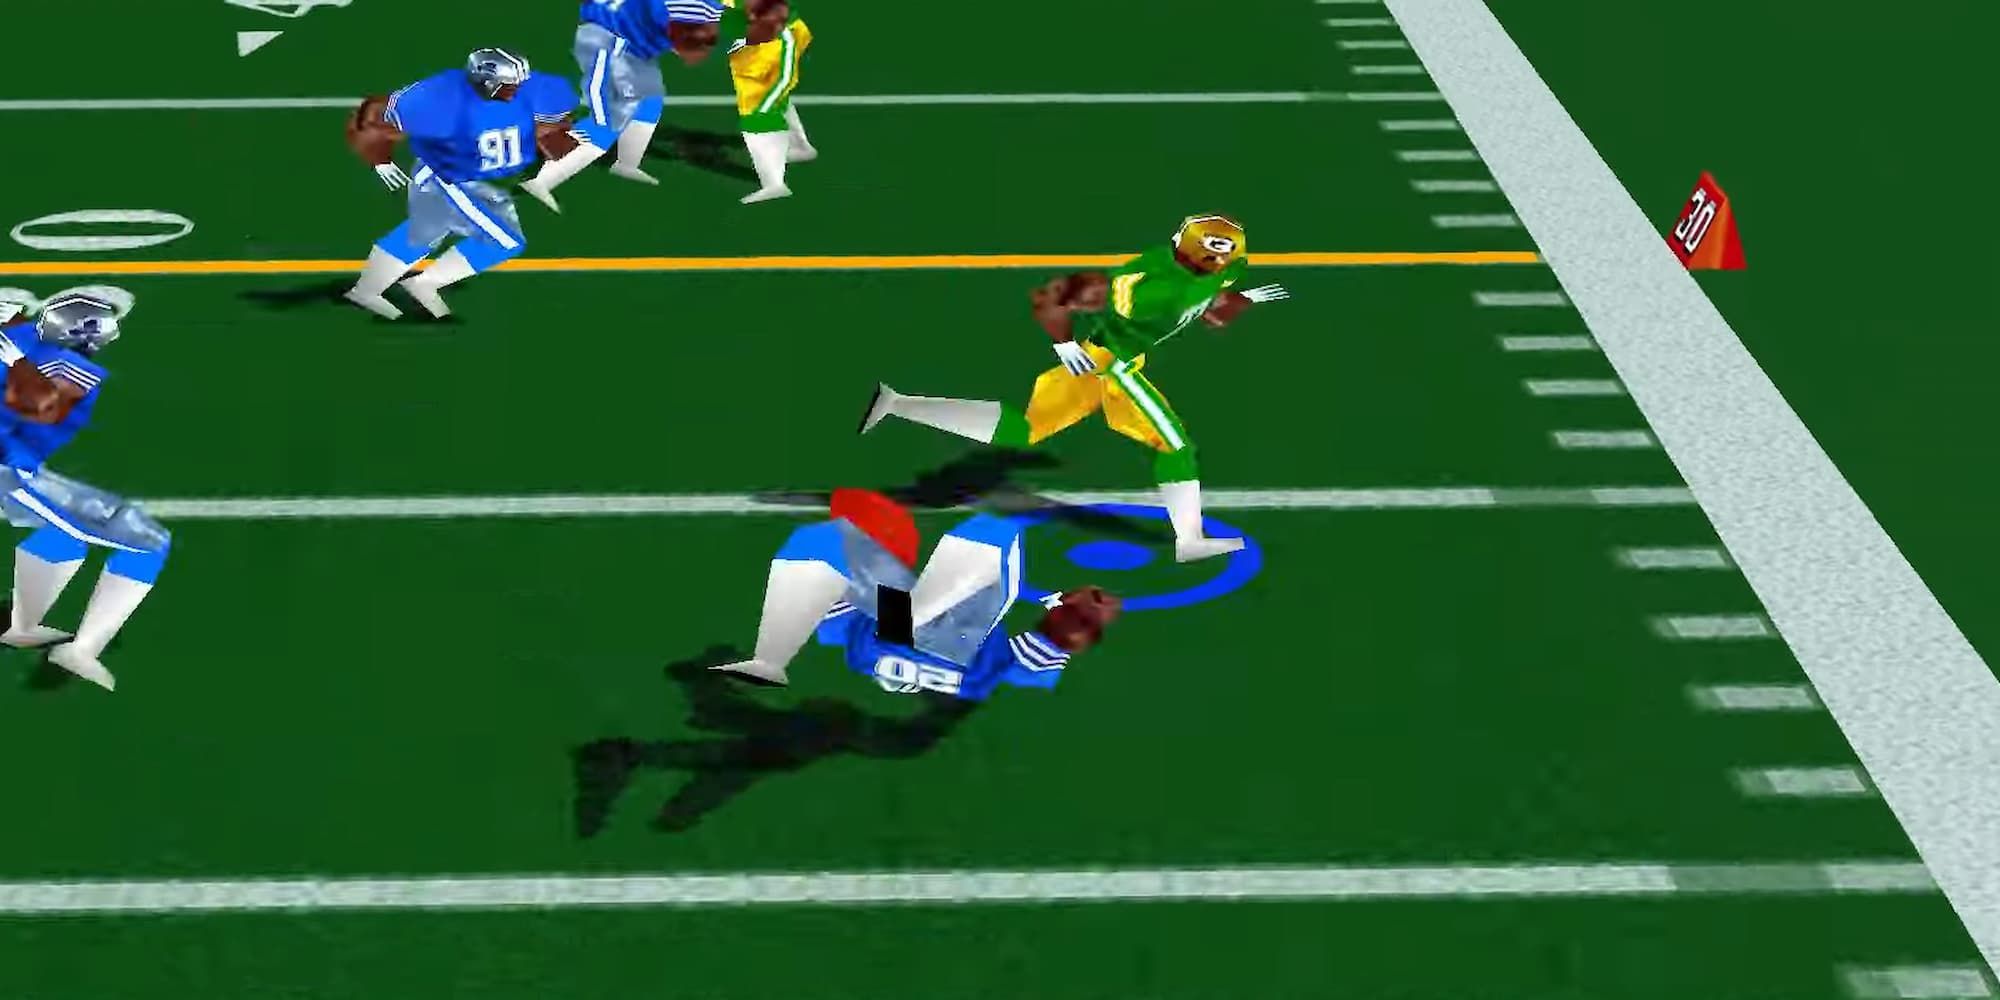 At the NFL Blitz 2000, a Detroit Lions player was blown away after being tackled by a Green Bay Packers player.